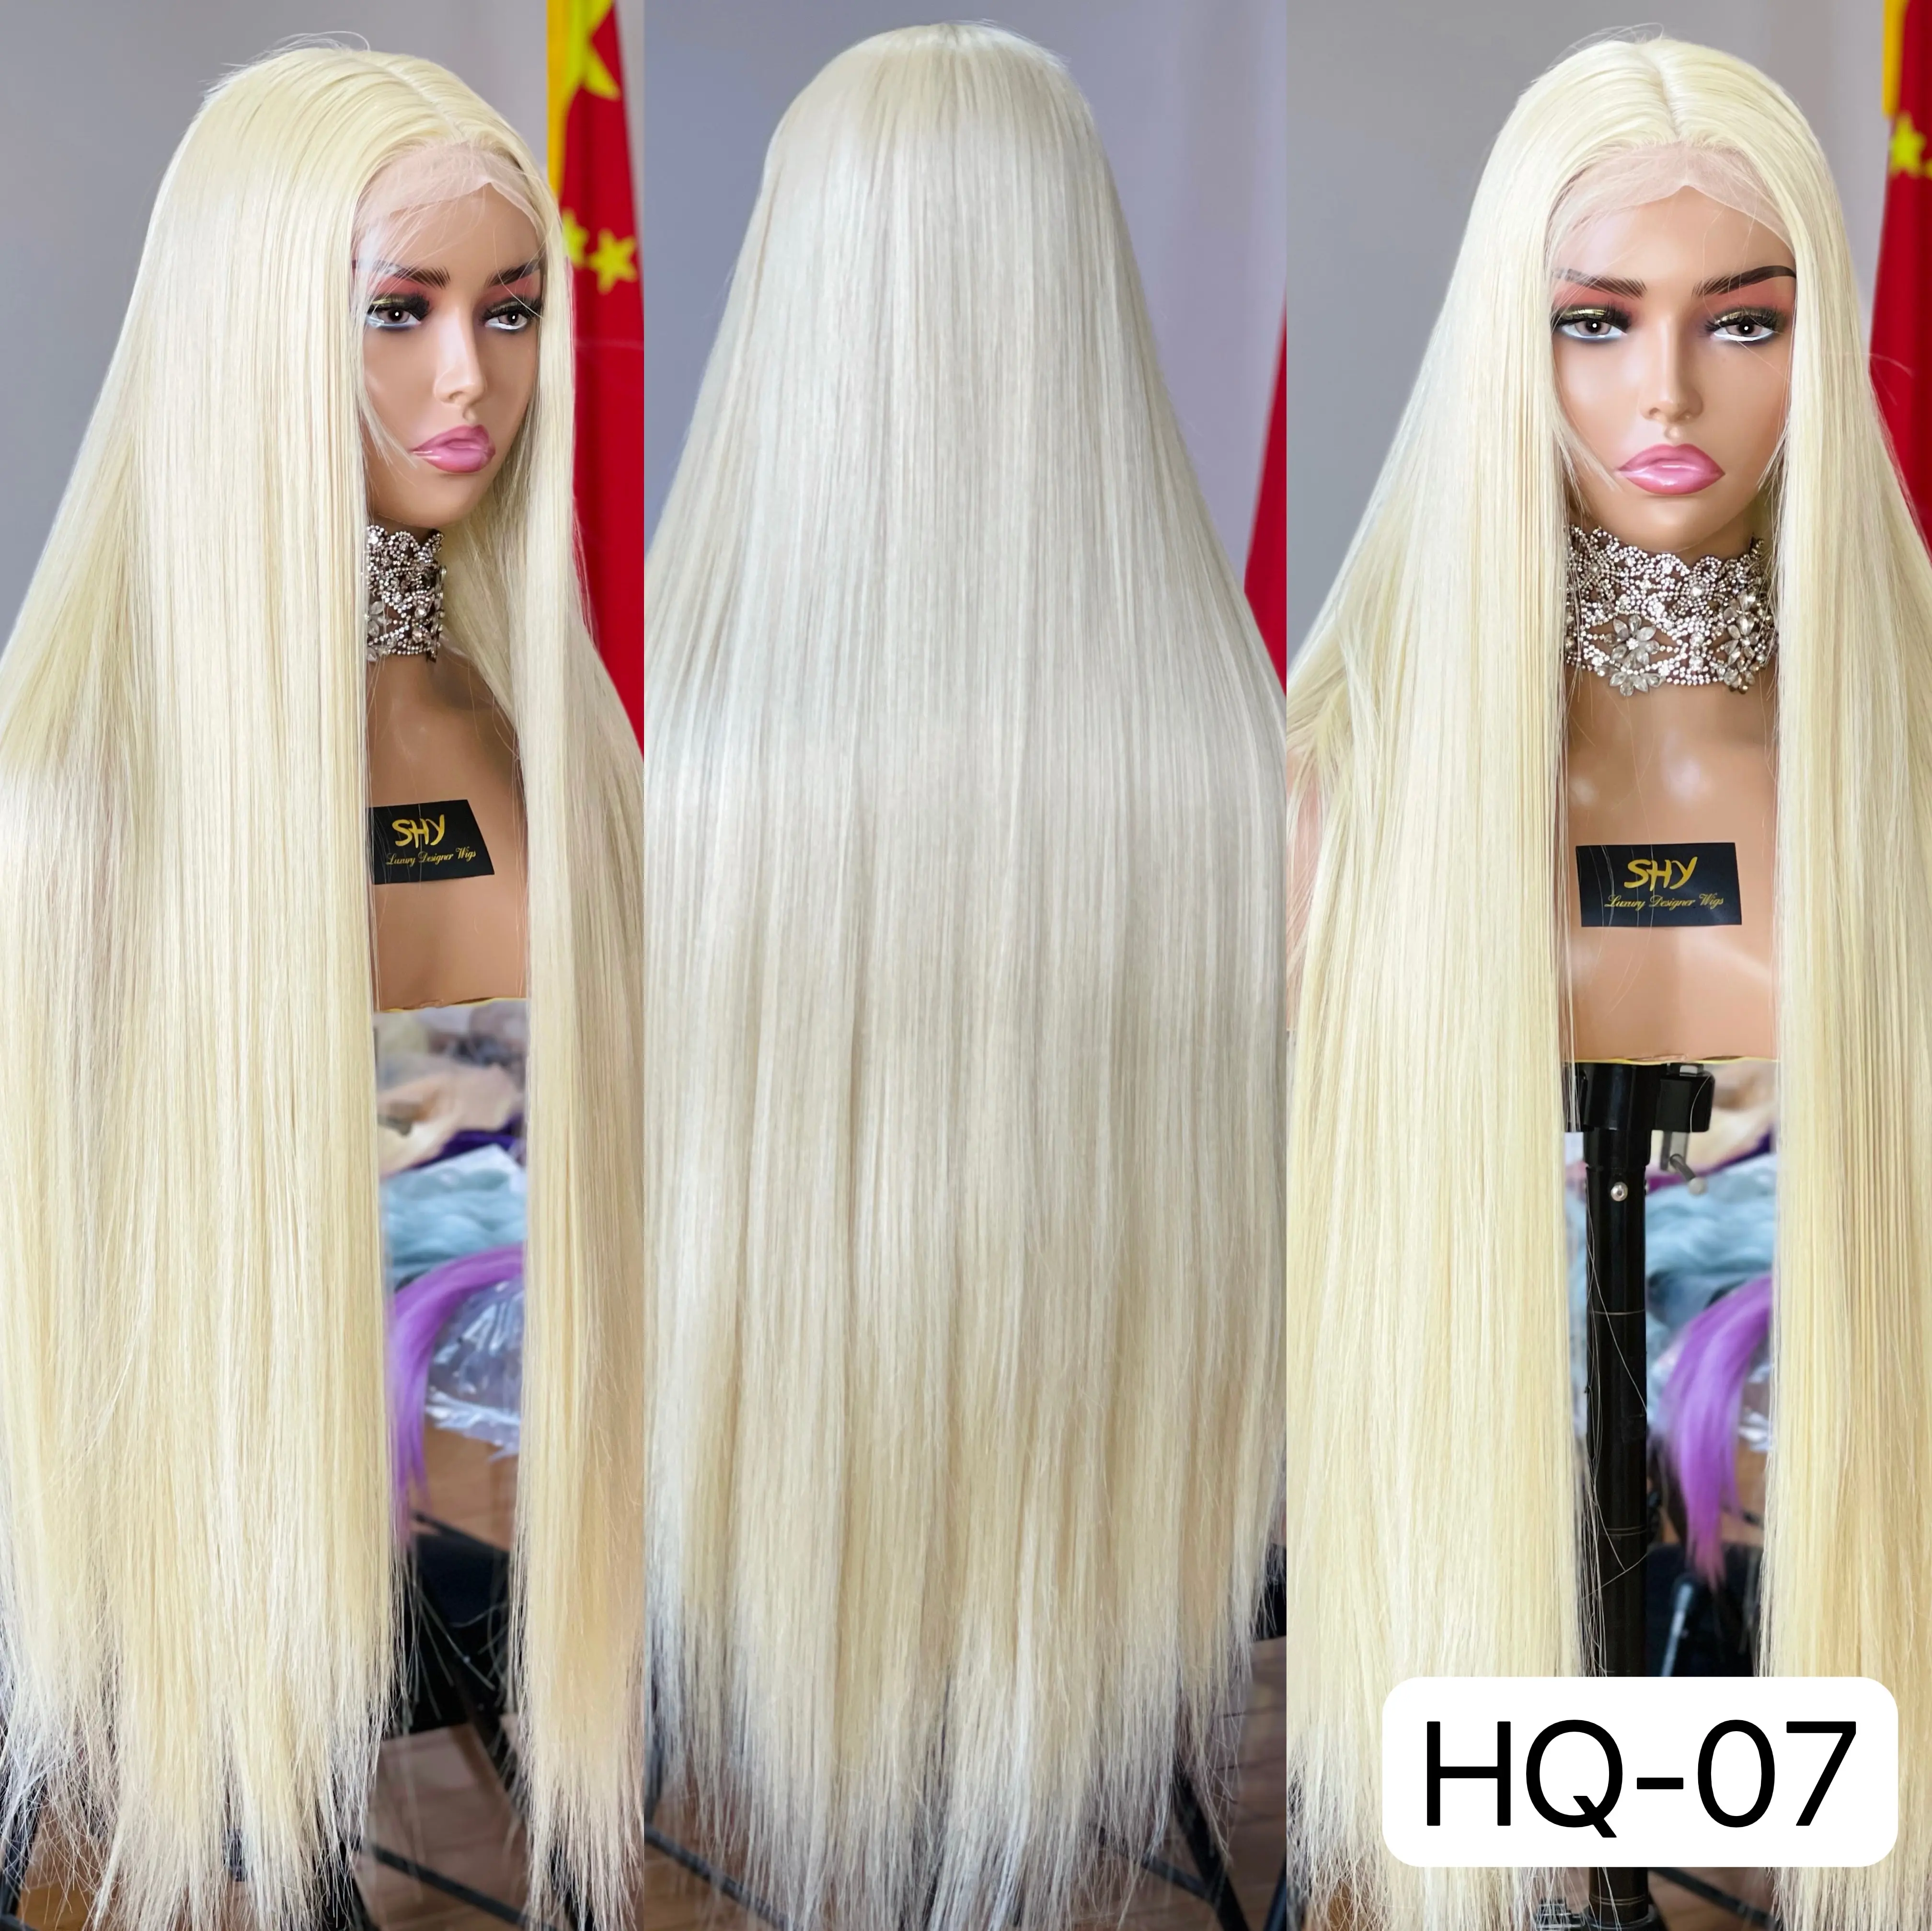 Shy Wholesale 613 Long Straight Lace Wigs, 13x4x1 Synthetic Futura Lace Part Wigs for Black Women ,Futura Synthetic Blonde Wig